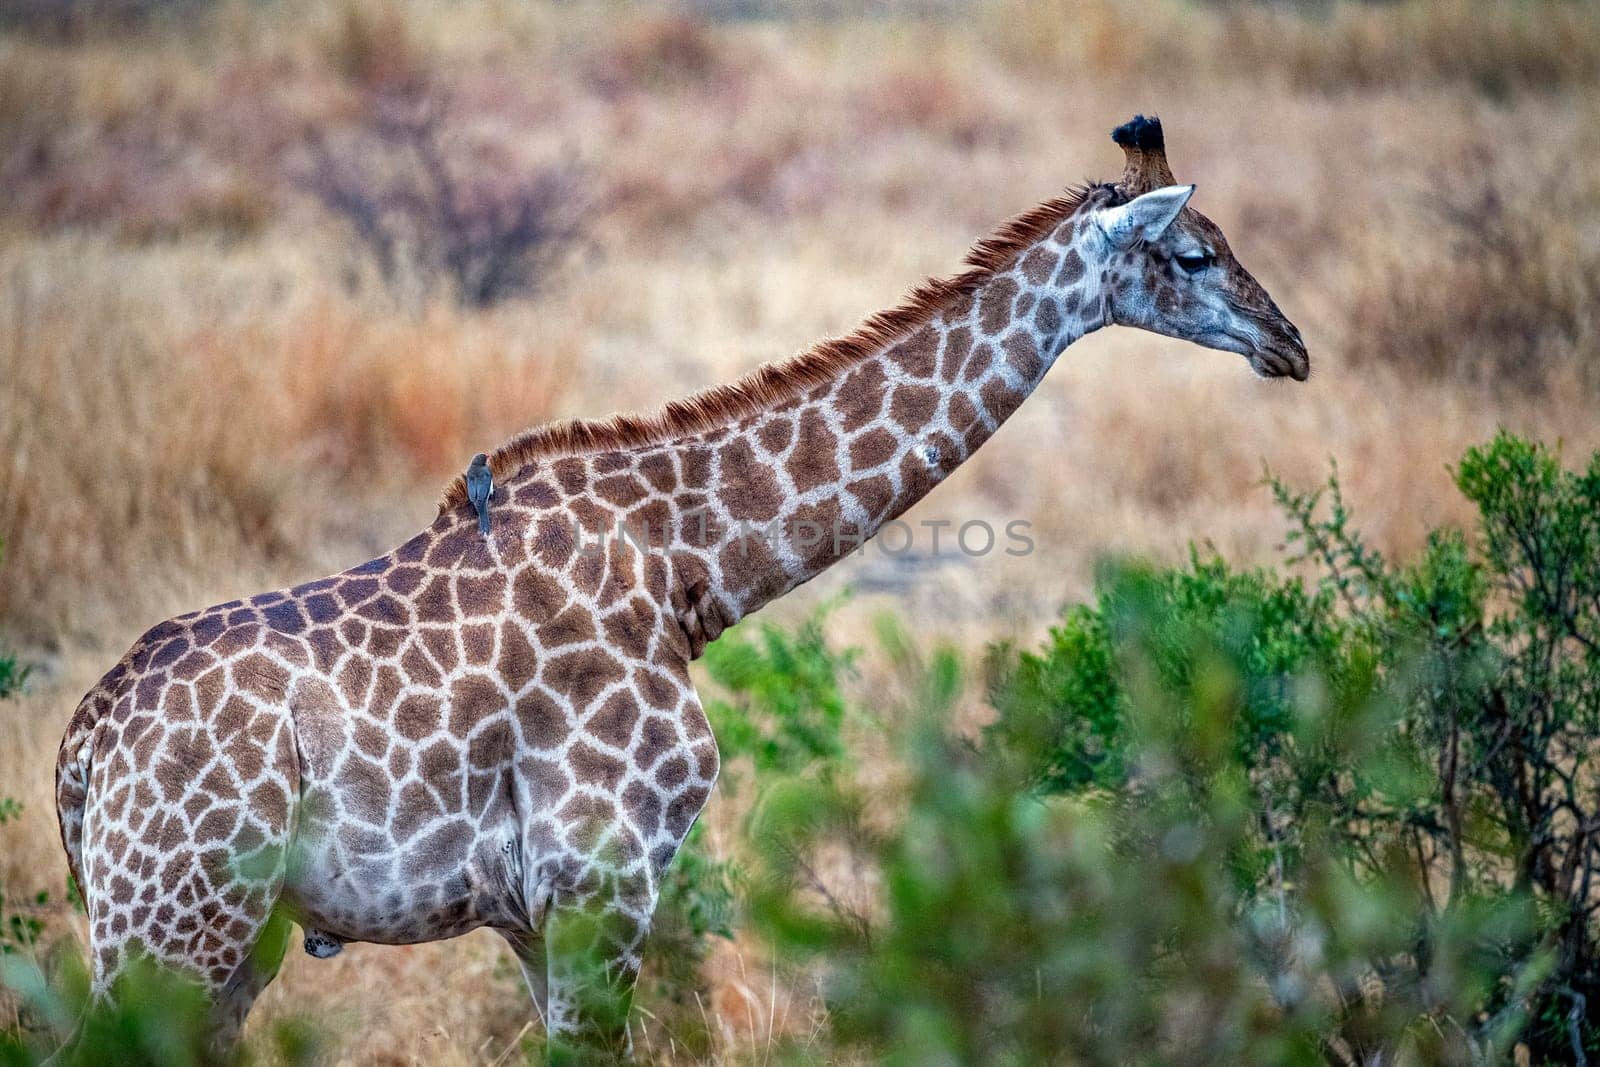 giraffe in kruger park south africa by AndreaIzzotti